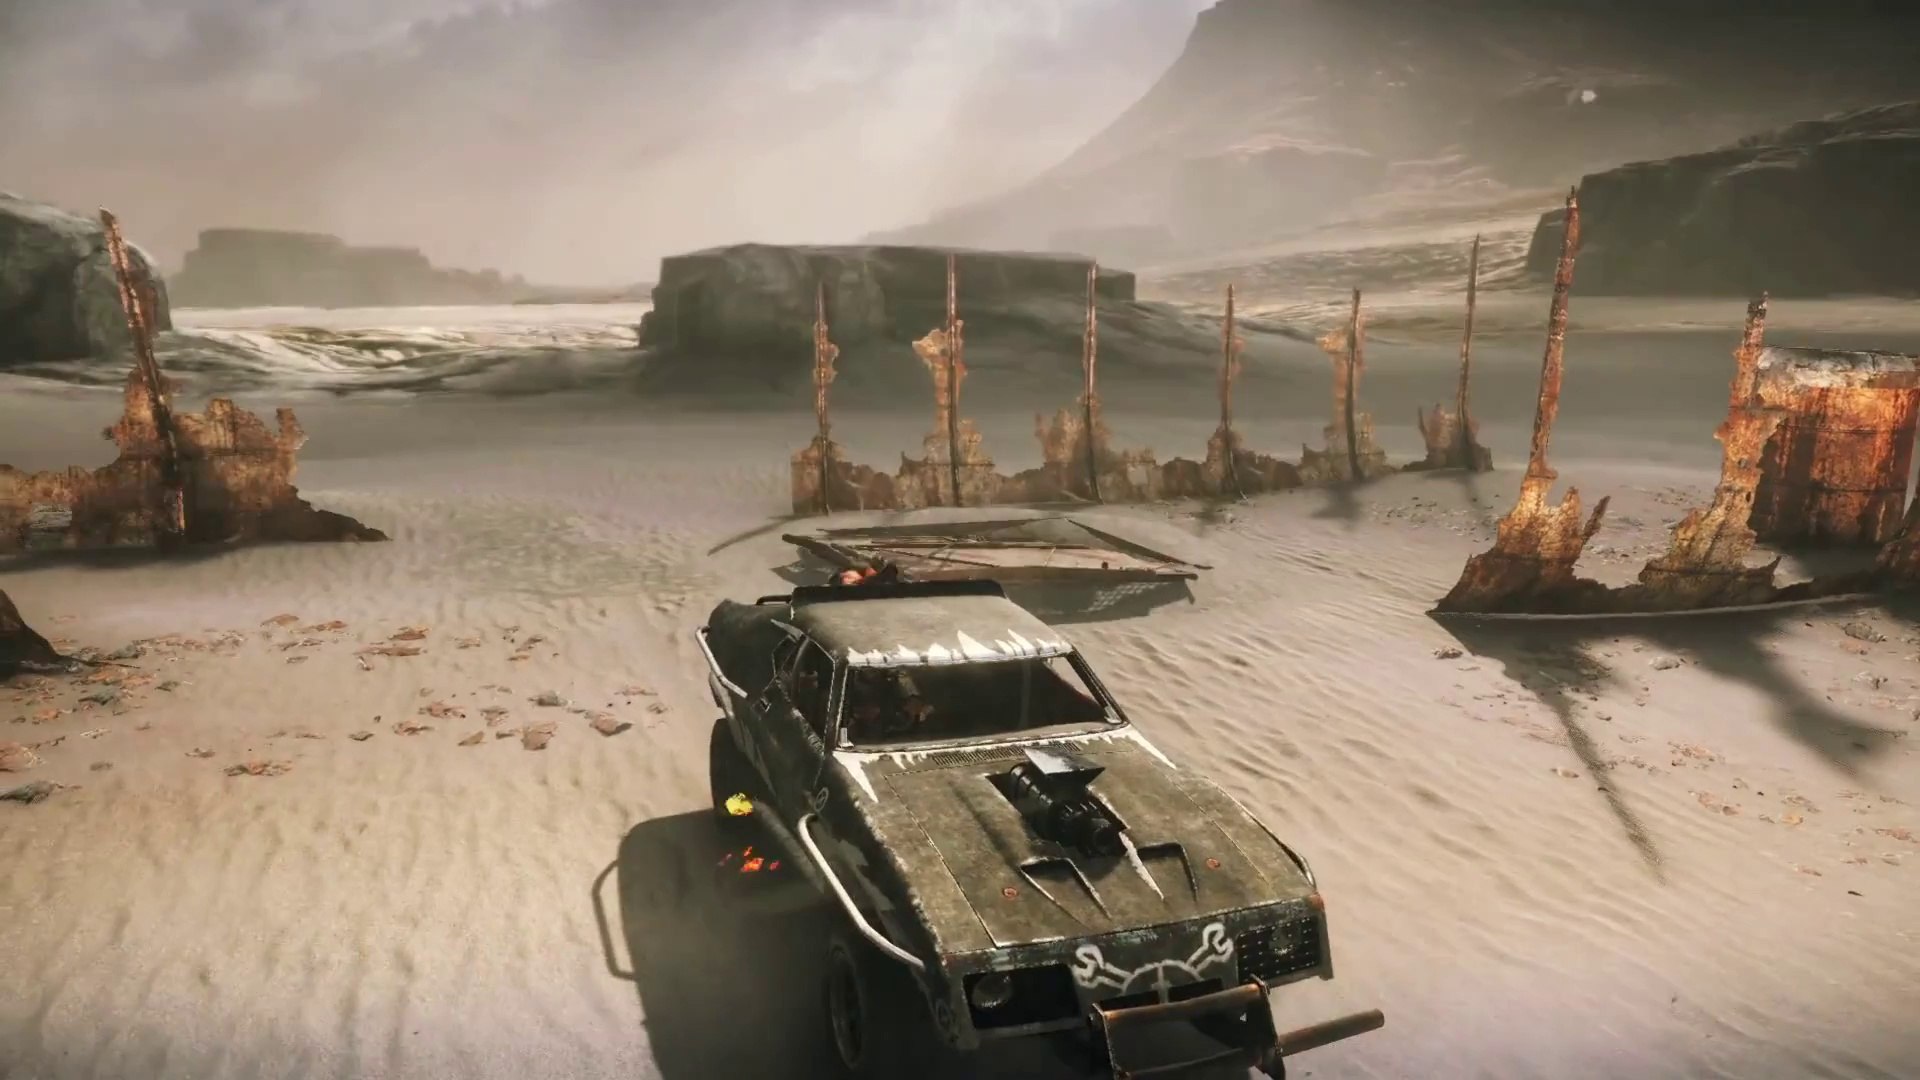 Max gameplay. Mad Max (игра, 2015). Mad Max ps4. Mad Max игра 2015 Gameplay. Игра Мад Макс геймплей.